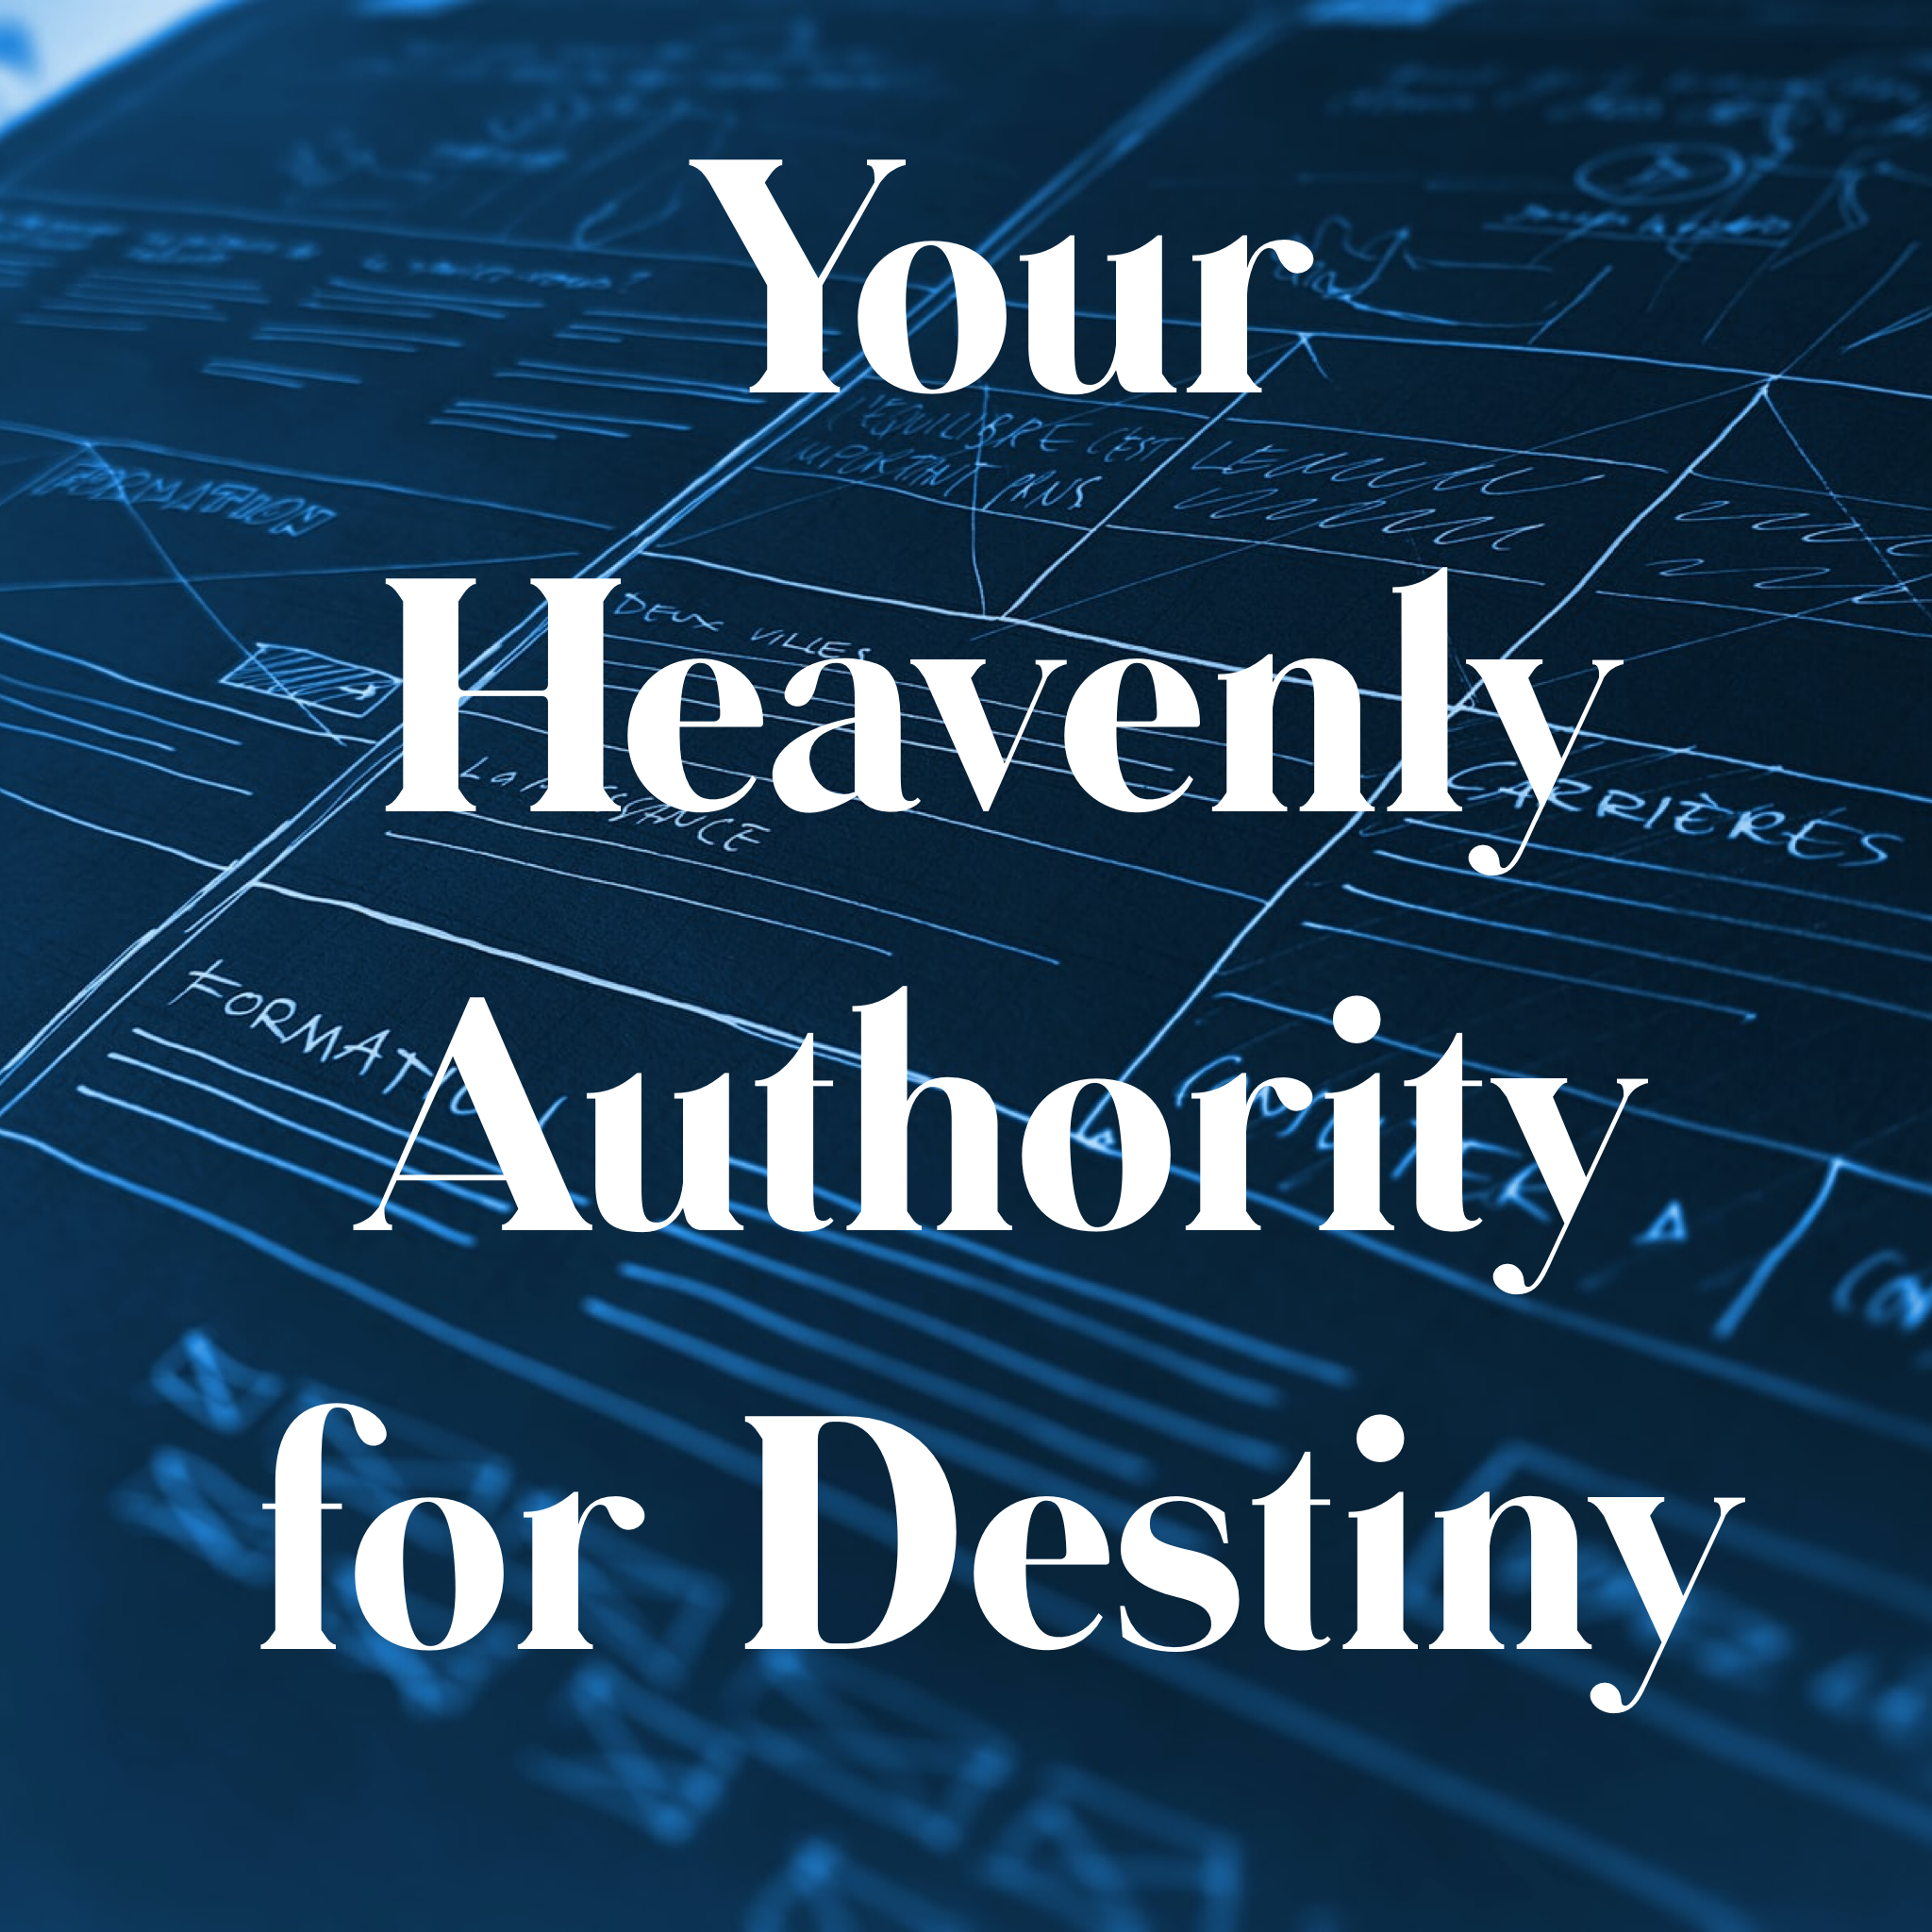 Your Heavenly Authority for Destiny - 9/27/20